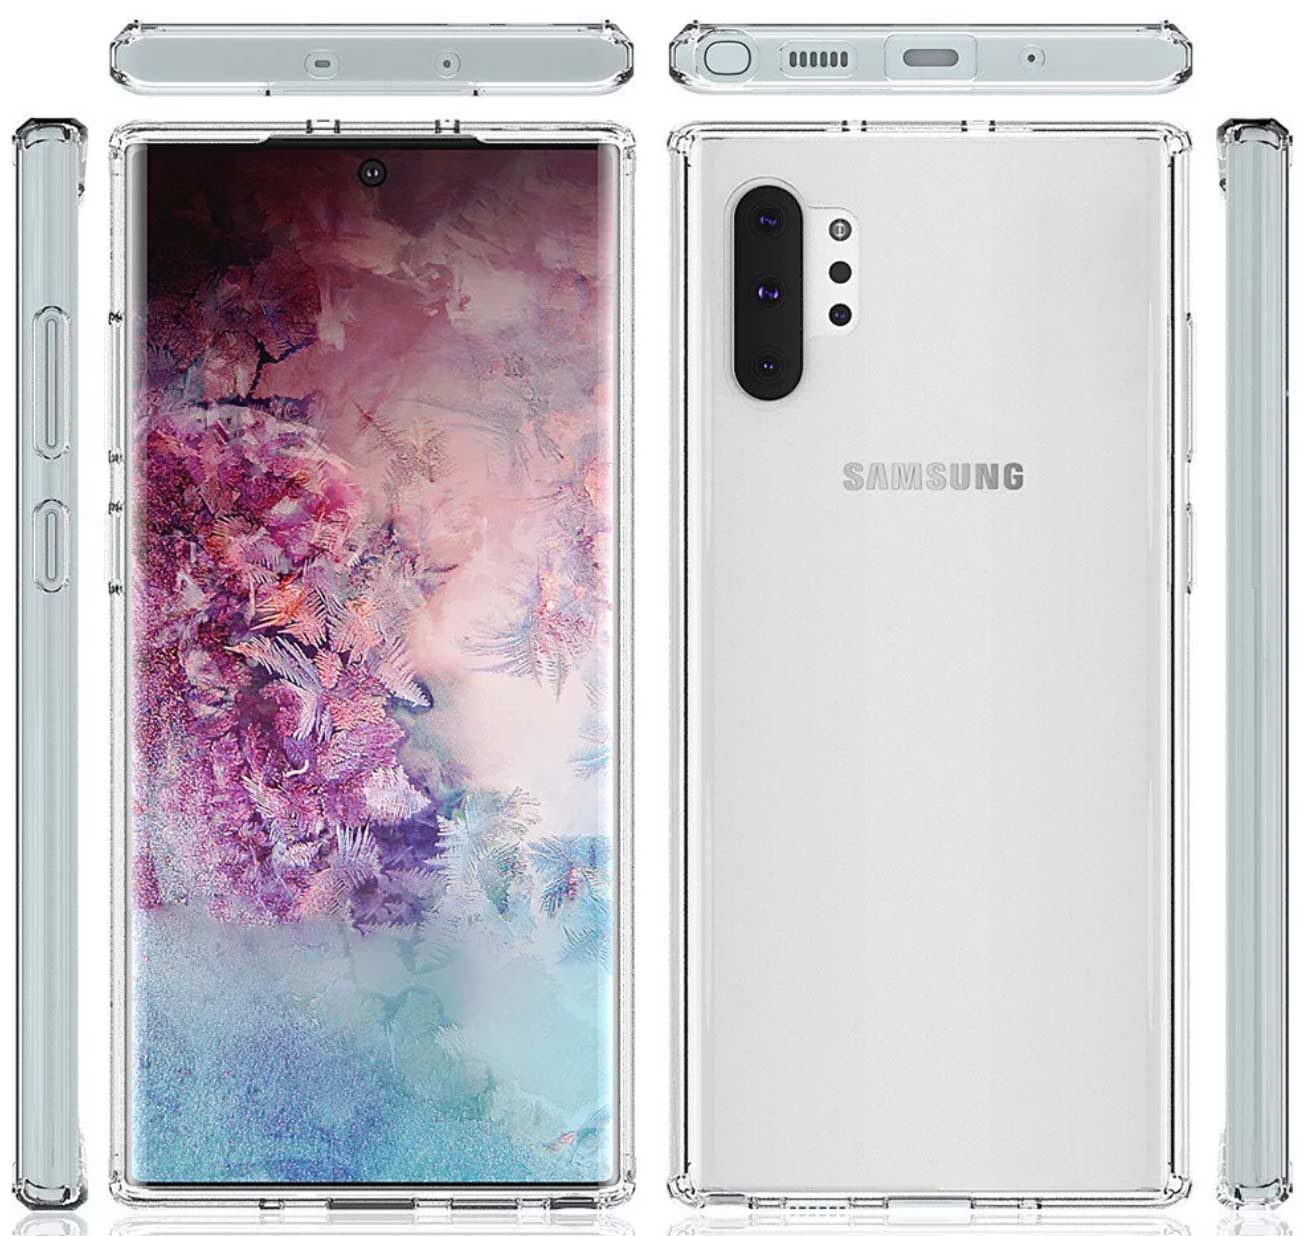 Galaxy s10 note. Samsung Galaxy Note 10. Samsung Galaxy Note 10 плюс. Samsung Galaxy s10 Note. Samsung Galaxy Note 10/10+.